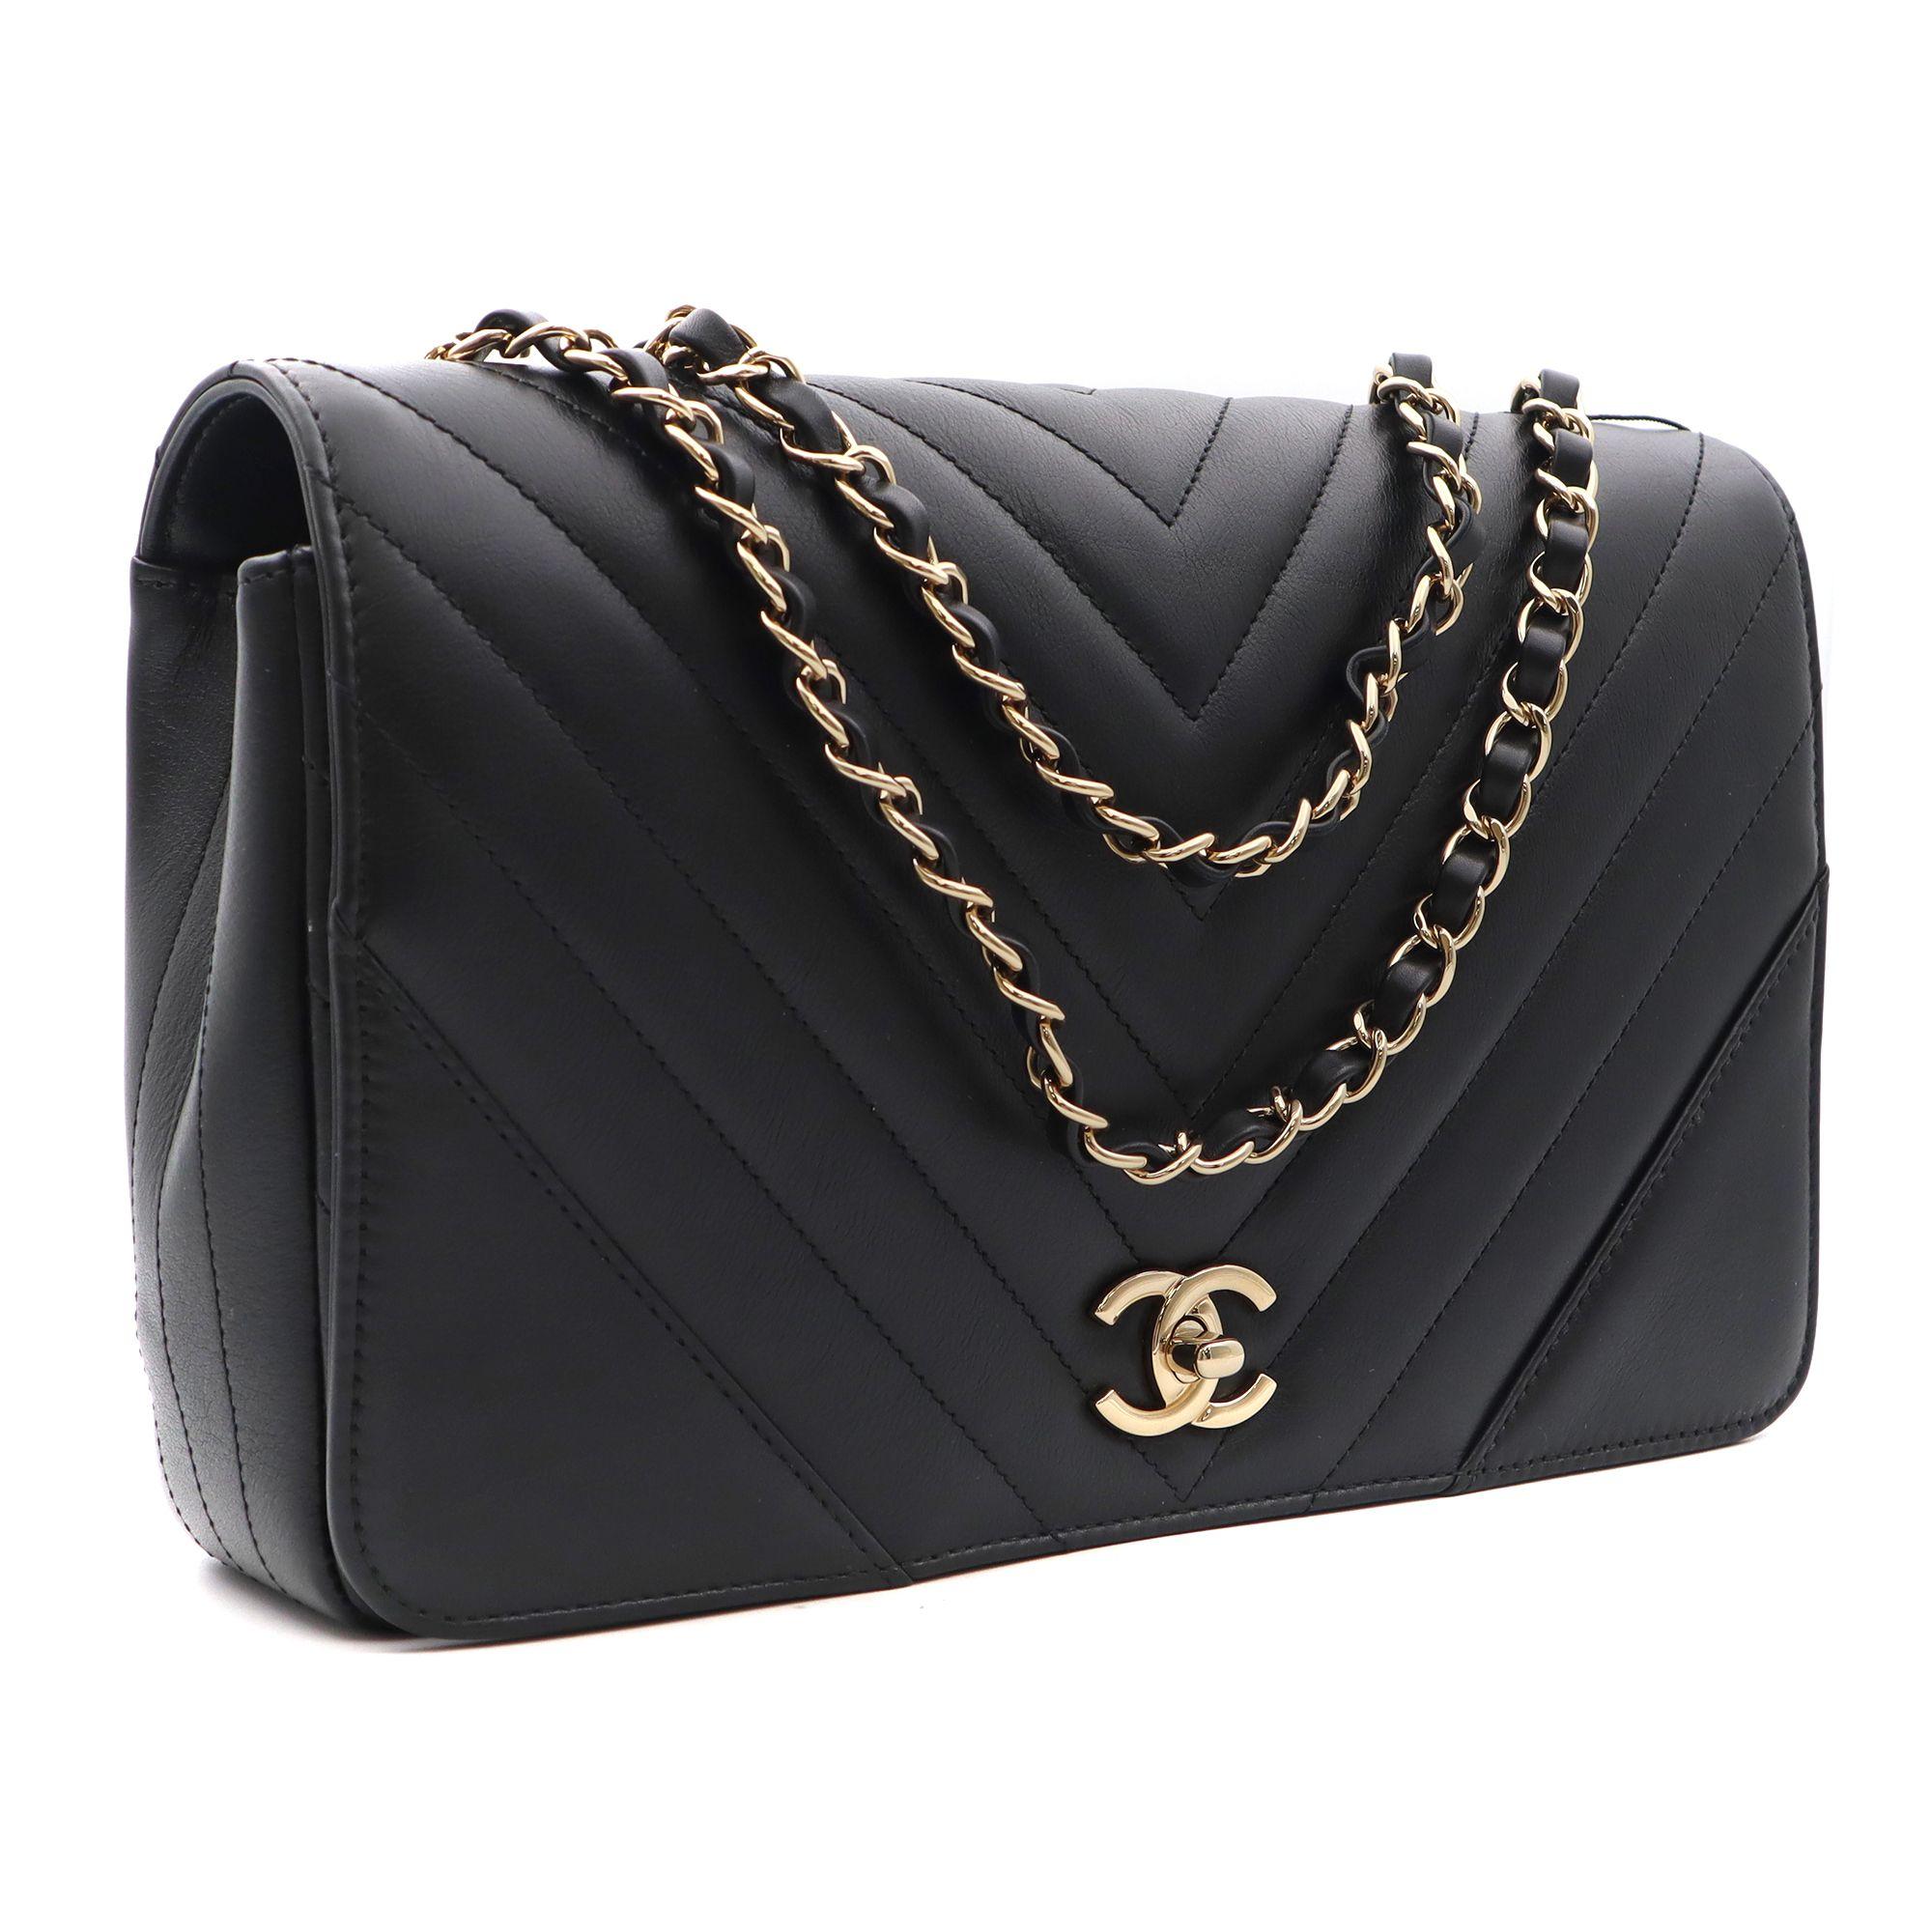 This Chanel shoulder/crossbody bag is crafted of chevron calfskin leather in black color. The bag features light gold chain link leather threaded shoulder straps and a full frontal flap with a light gold Chanel CC turn lock. It opens to a black